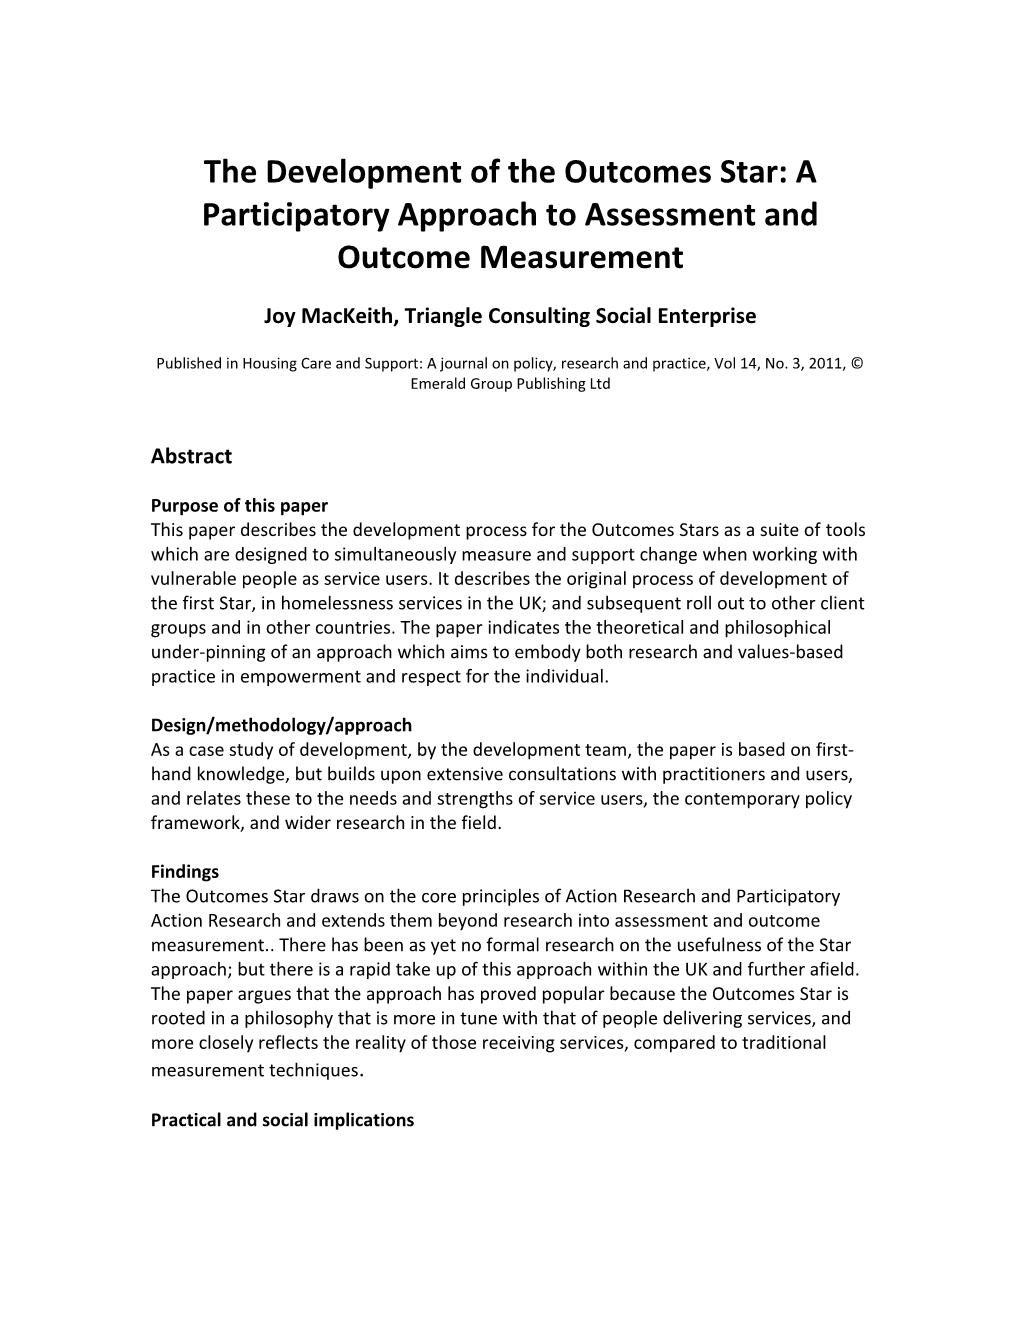 The Development of the Outcomes Star: a Participatory Approach to Assessment and Outcome